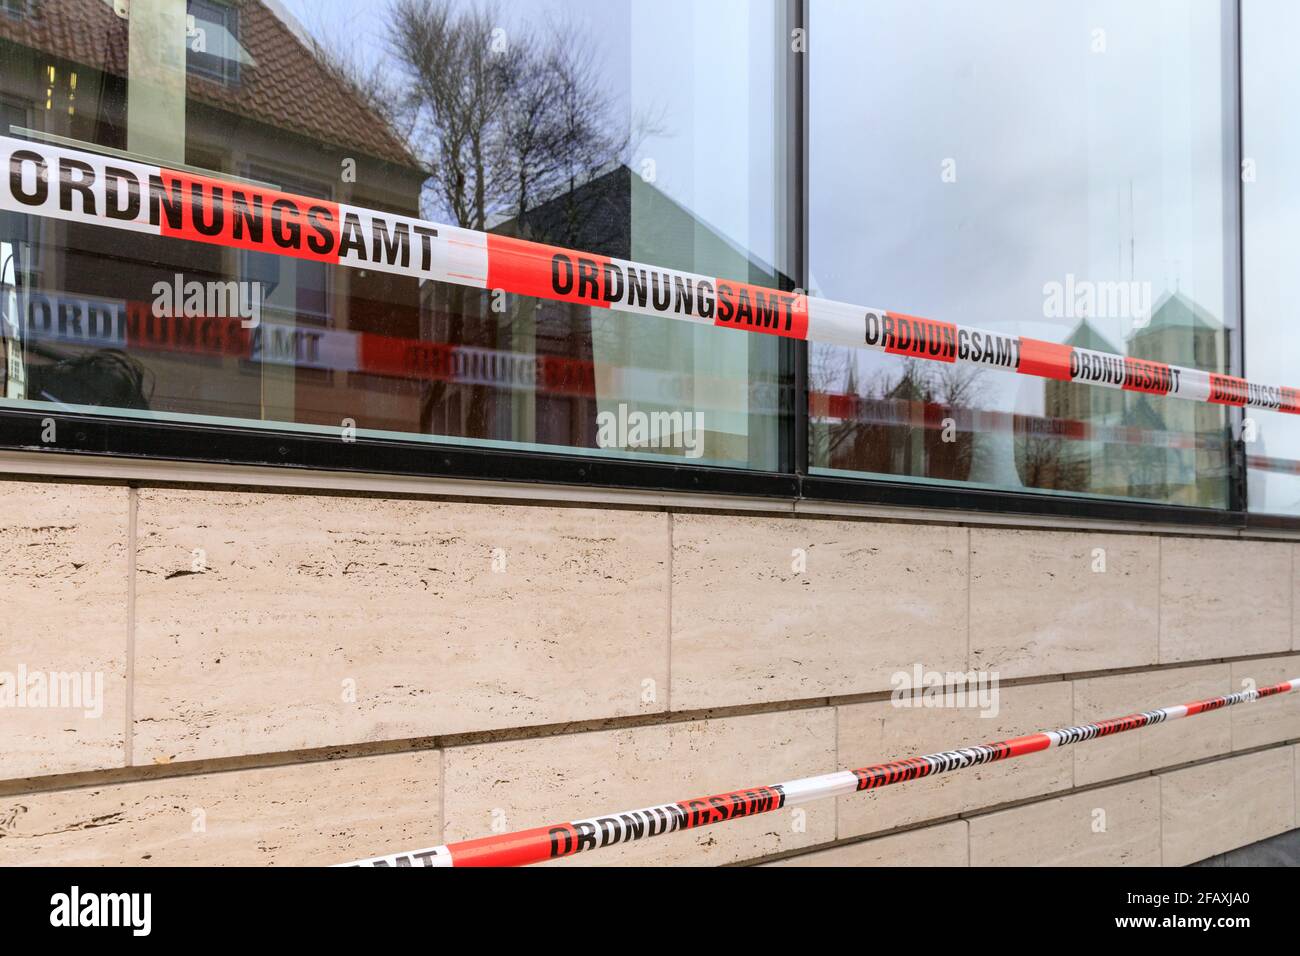 Ordnungsamt (office for public order) barrier tape used to cordon off a public space for no entry in Muenster, Germany Stock Photo